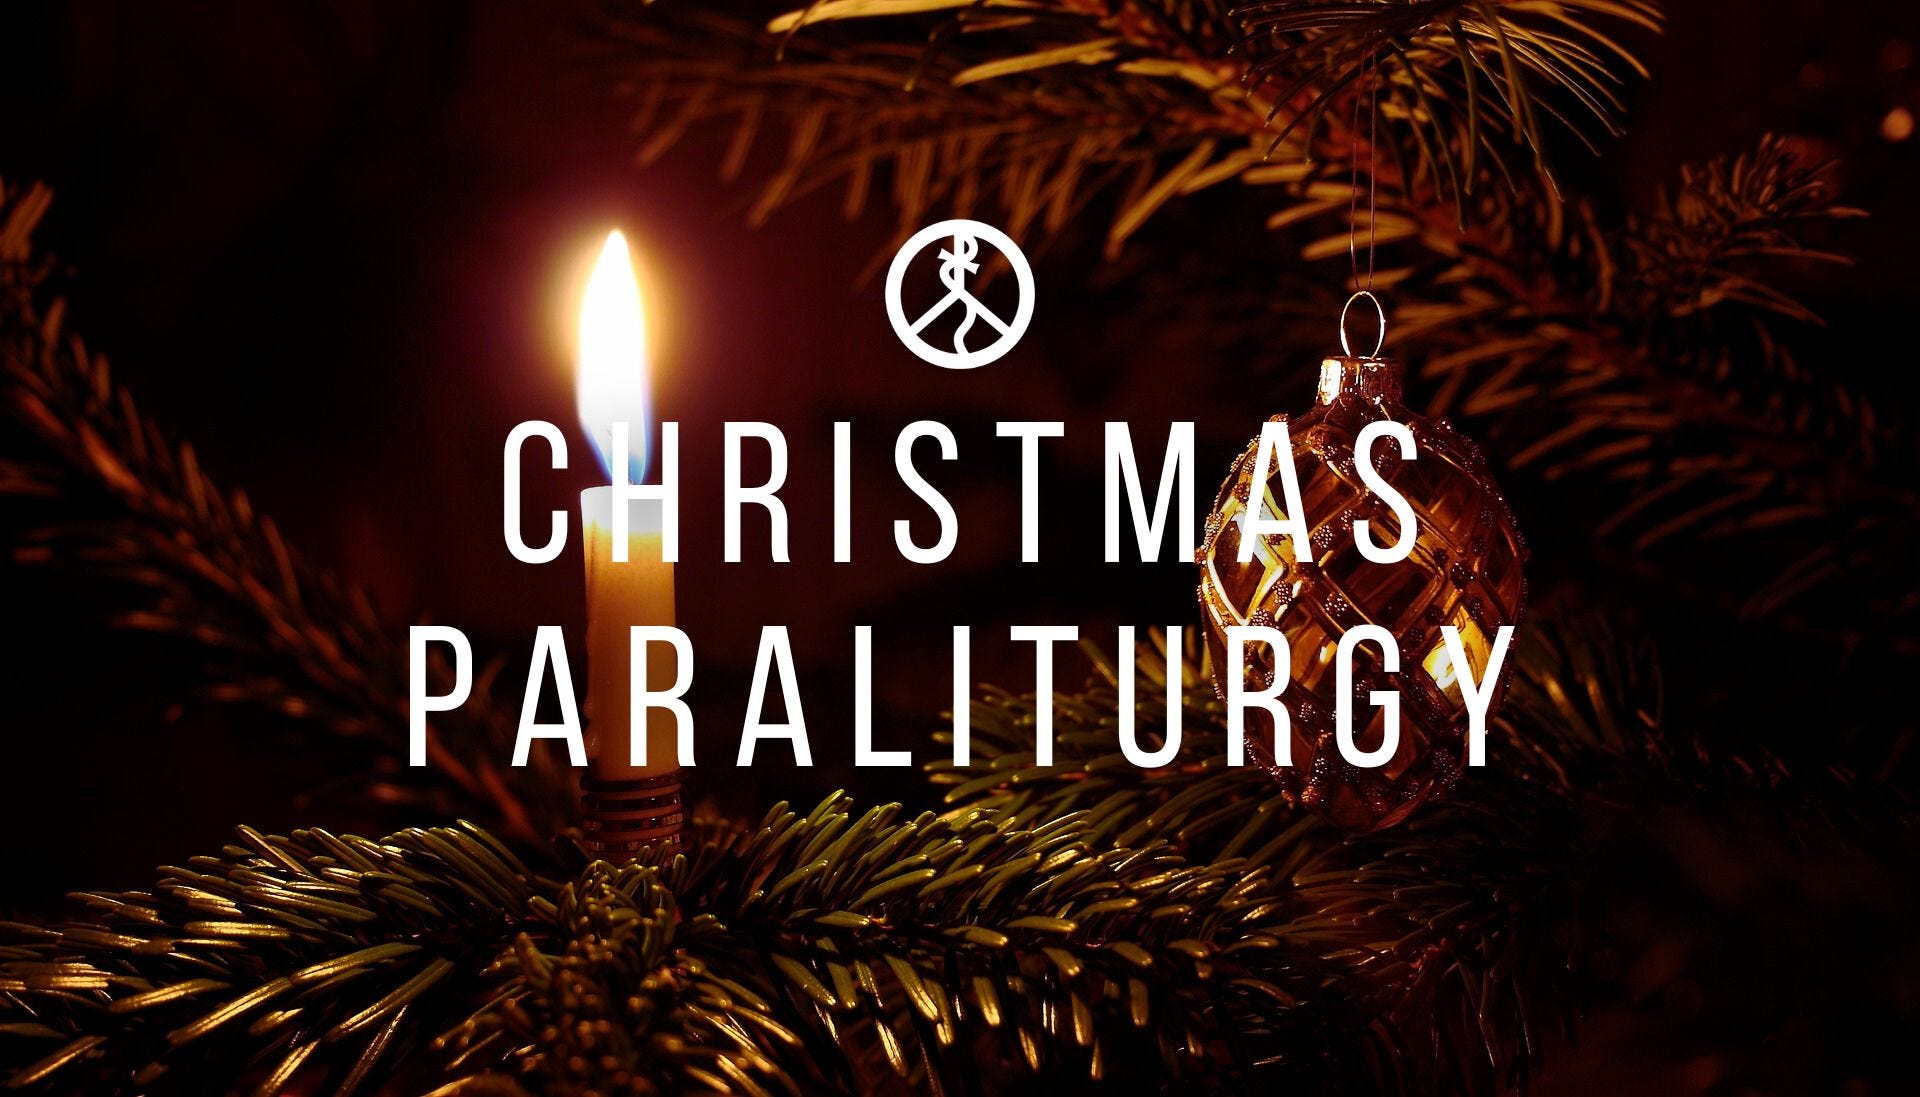 Xmas special #2: Gifts, trees & nativity scenes as paraliturgy